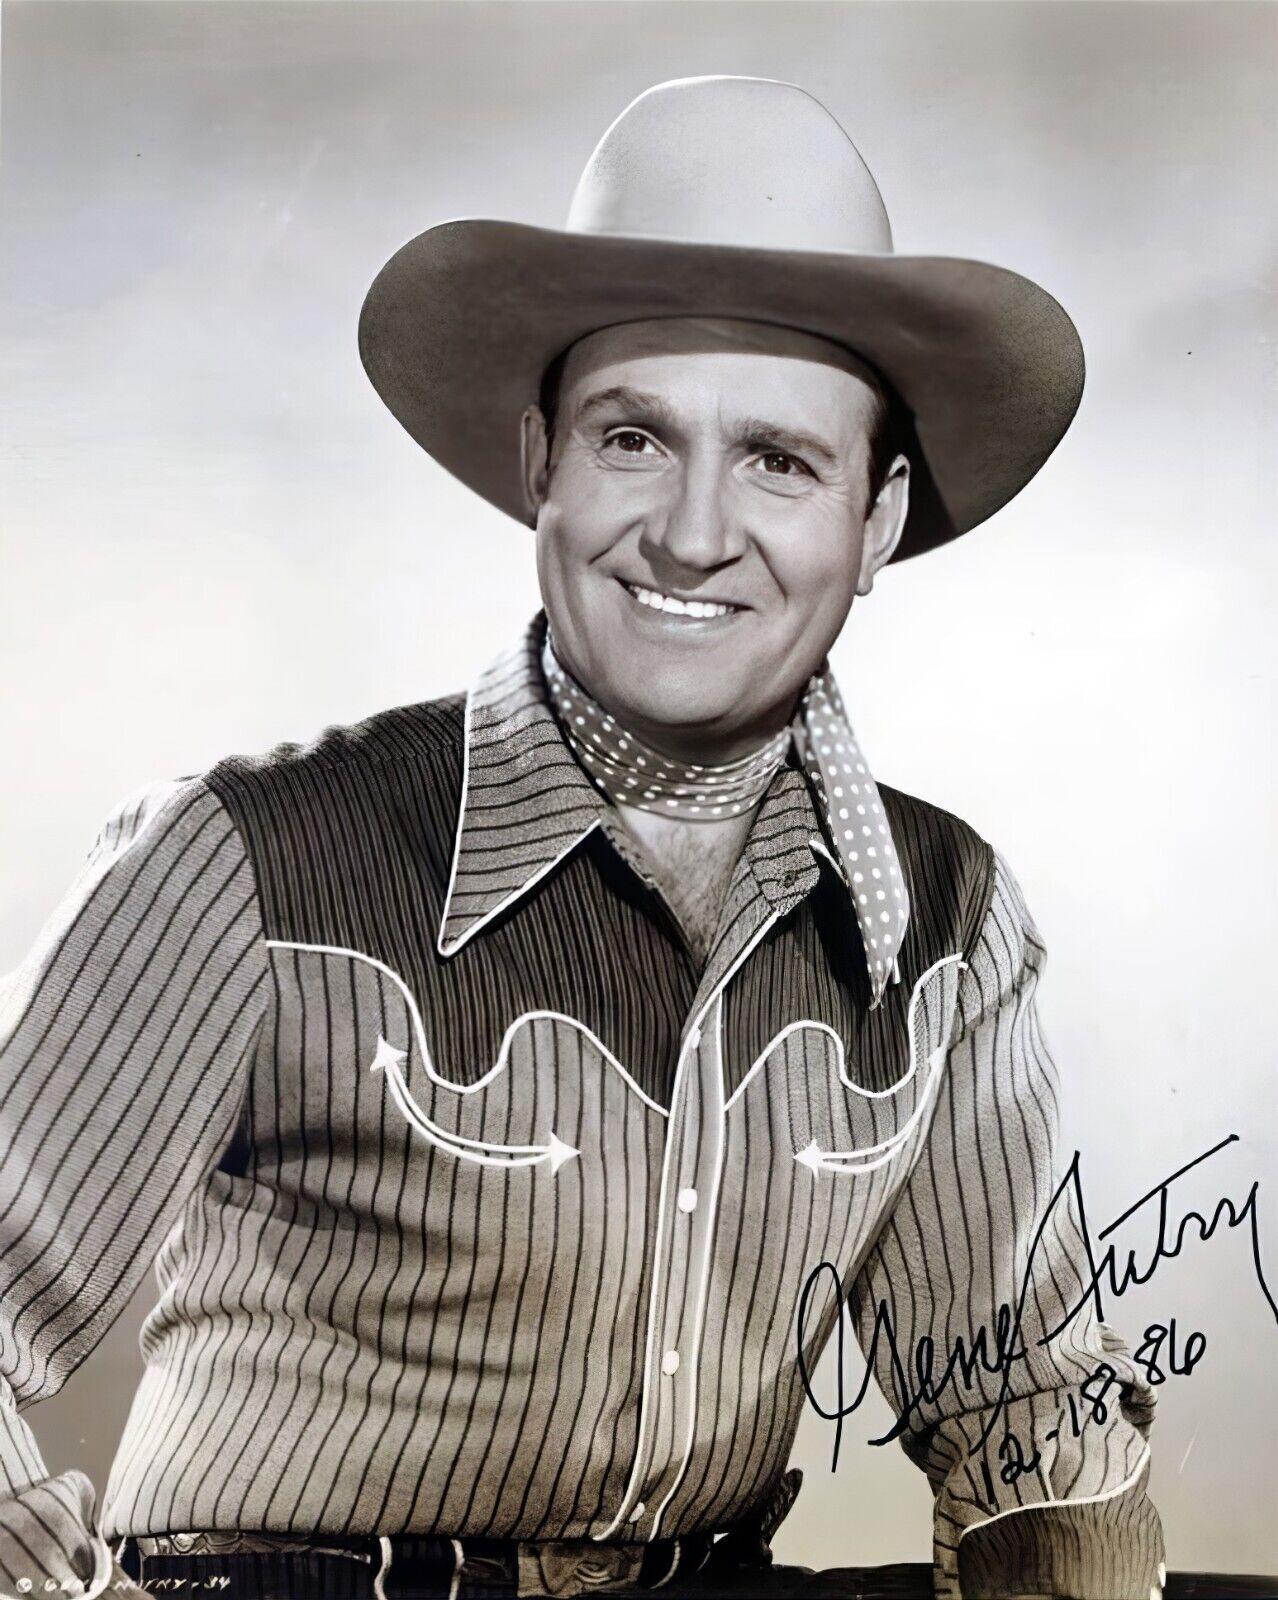 GENE AUTRY LEGENDARY AMERICAN COUNTRY SINGER AUTOGRAPHED 8X10 PHOTO REPRINT